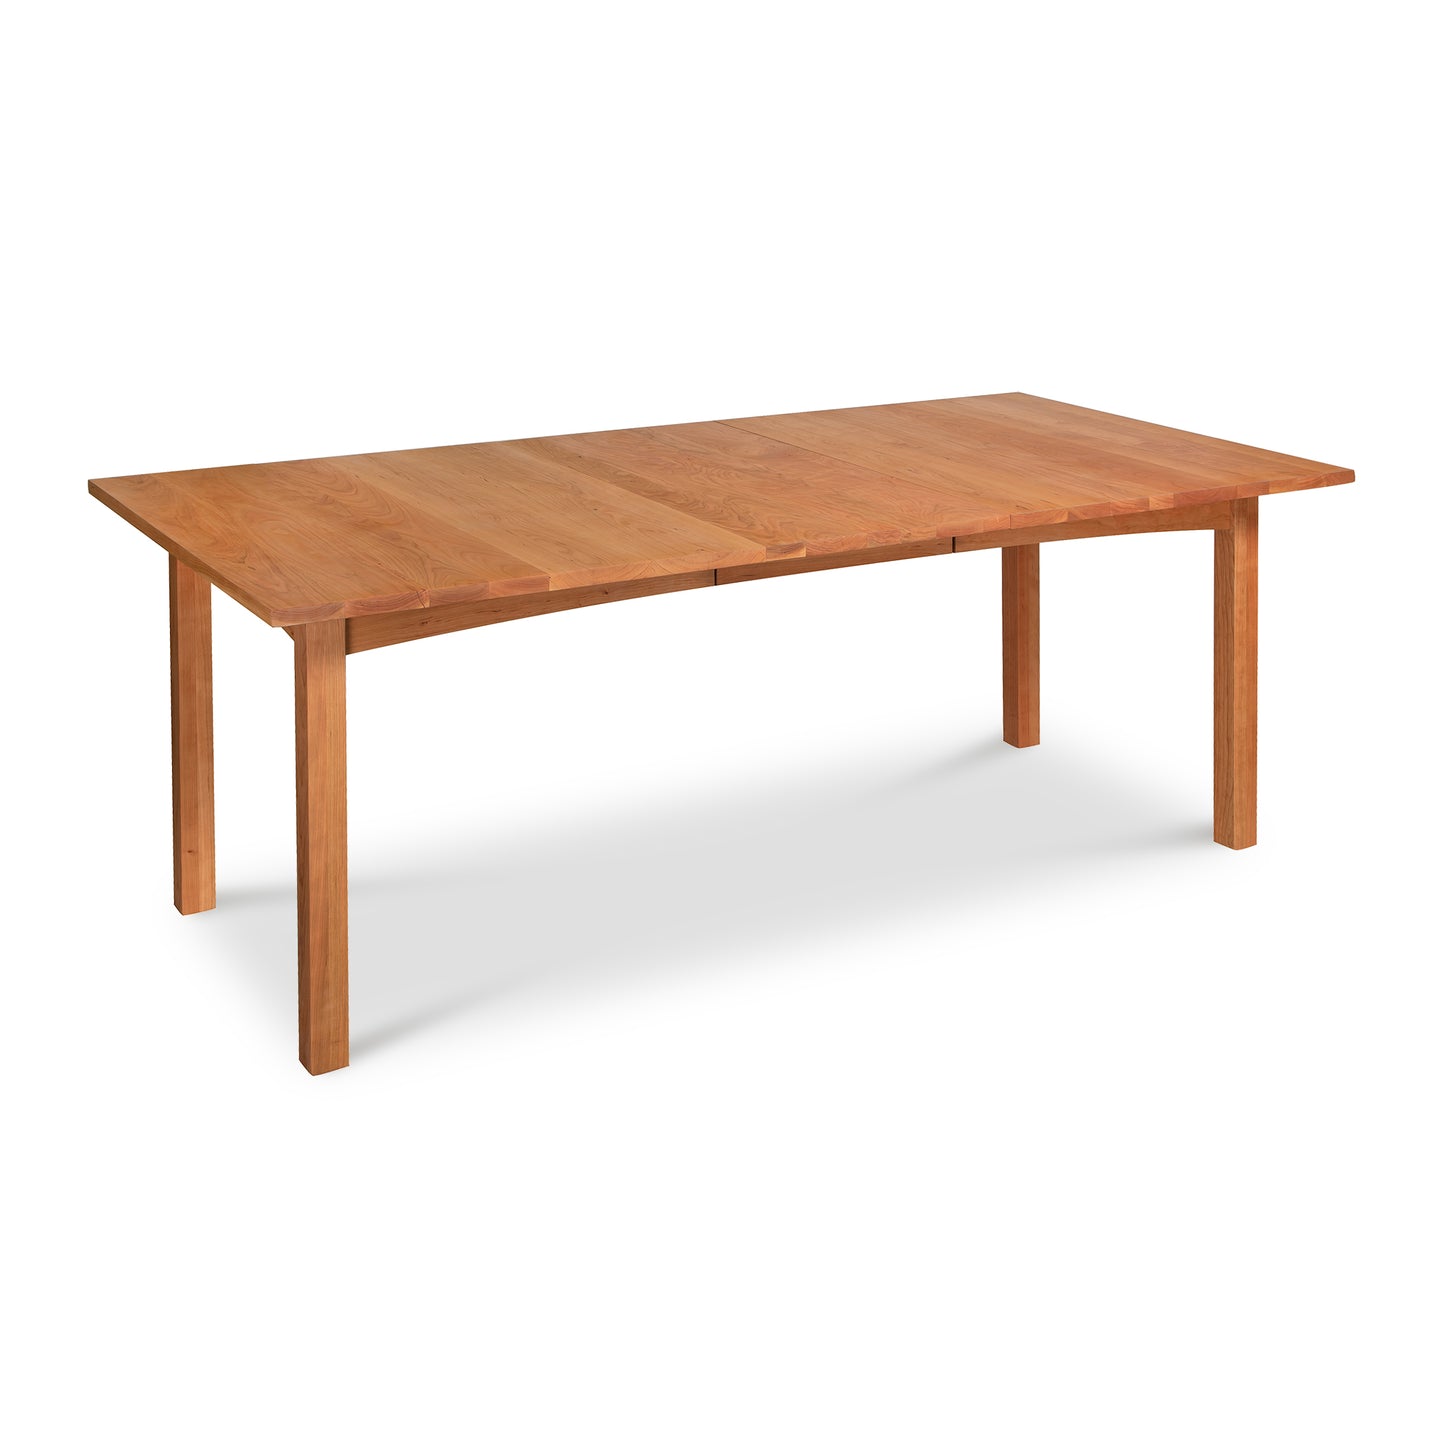 A simple wooden rectangular Burlington Shaker Extension Dining Table from Vermont Furniture Designs with four legs, isolated on a white background.